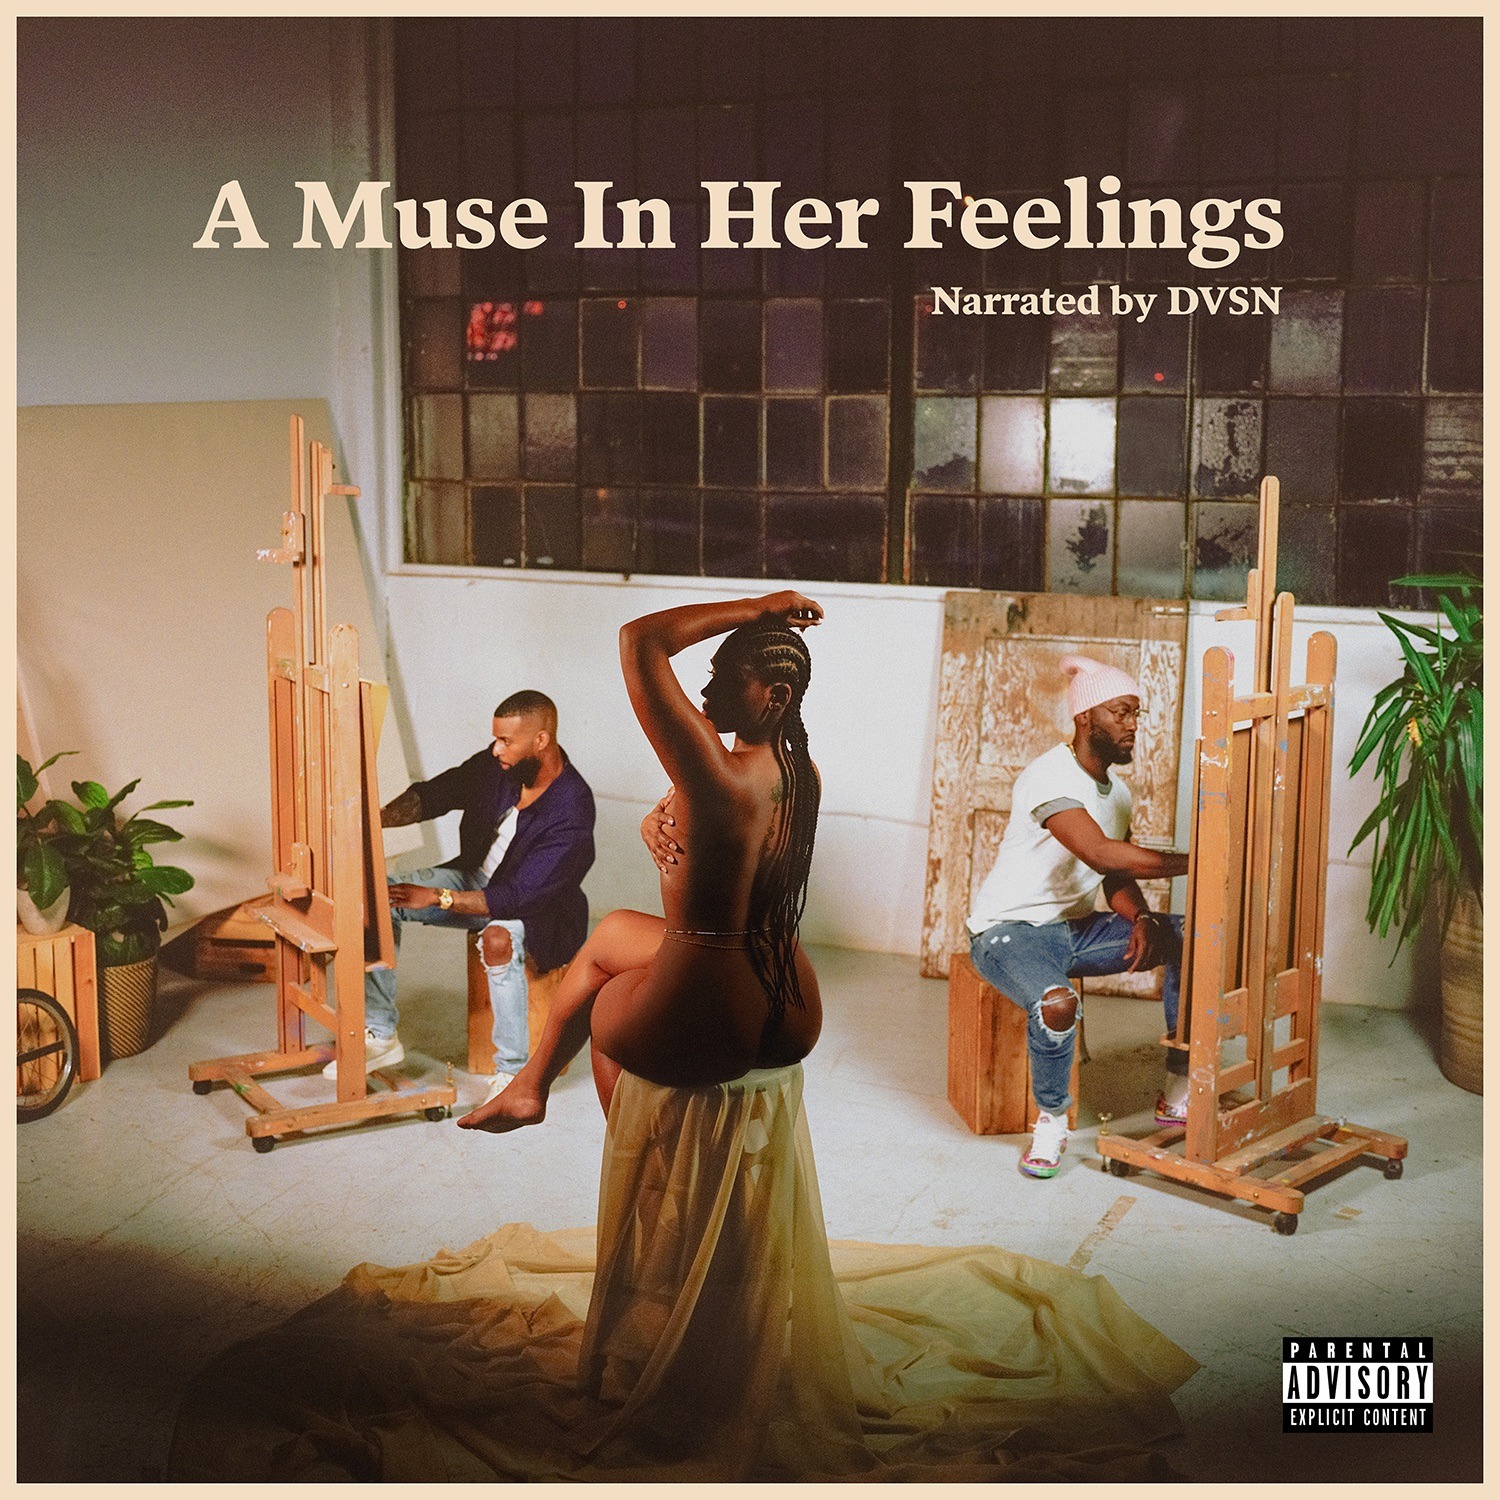 dvsn Returns With 'A Muse In Her Feelings' Album